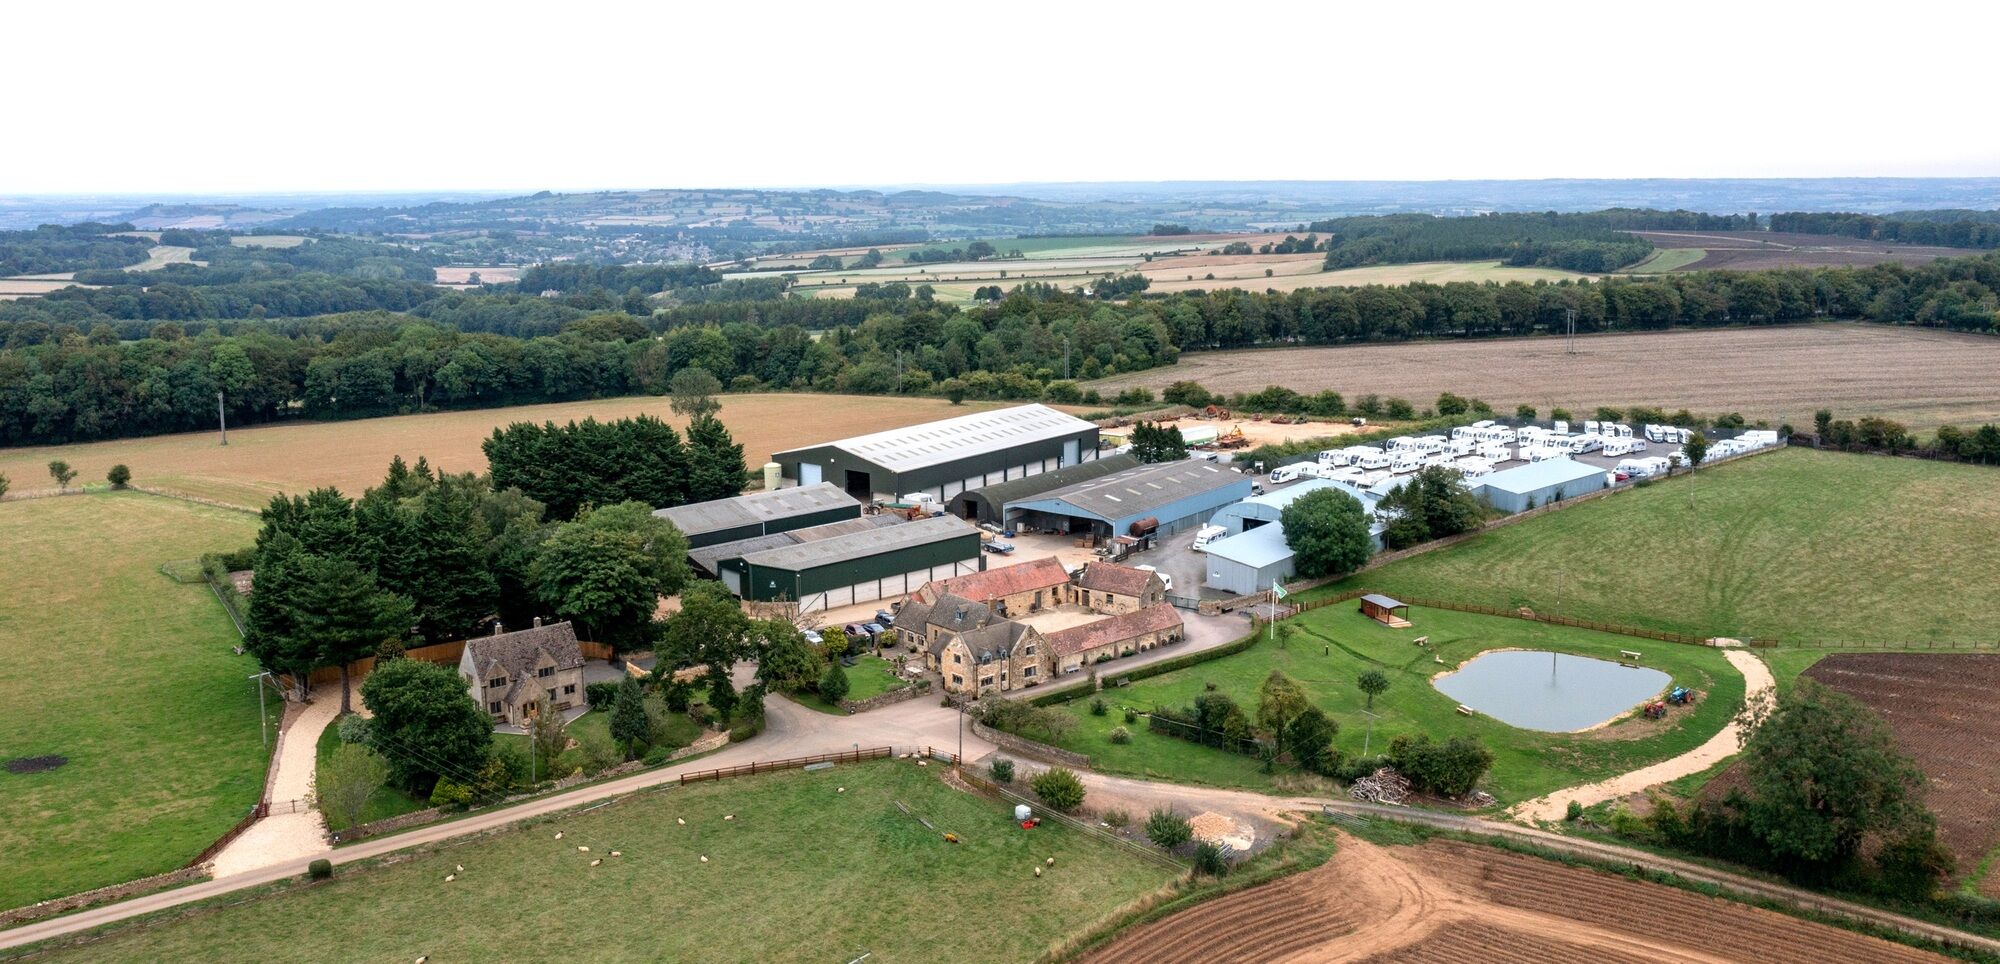 Aerial view of Tower Storage with Cotswold landscape in the background